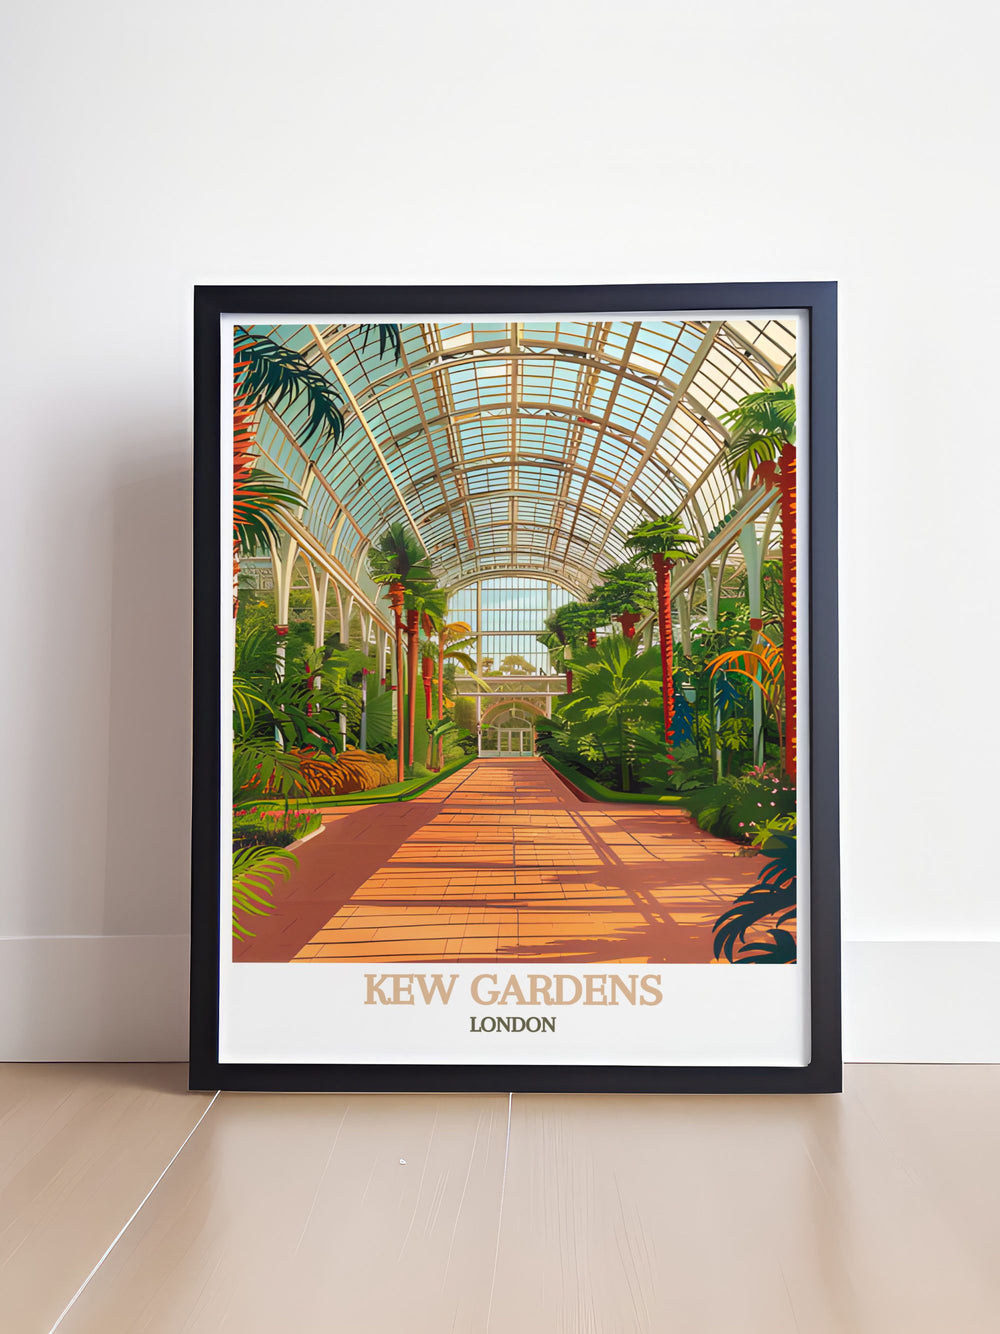 Highlighting the stunning Victorian architecture of the Temperate House, this travel poster features its intricate ironwork and expansive glass panels. Perfect for those who appreciate vibrant scenes and horticultural artistry.